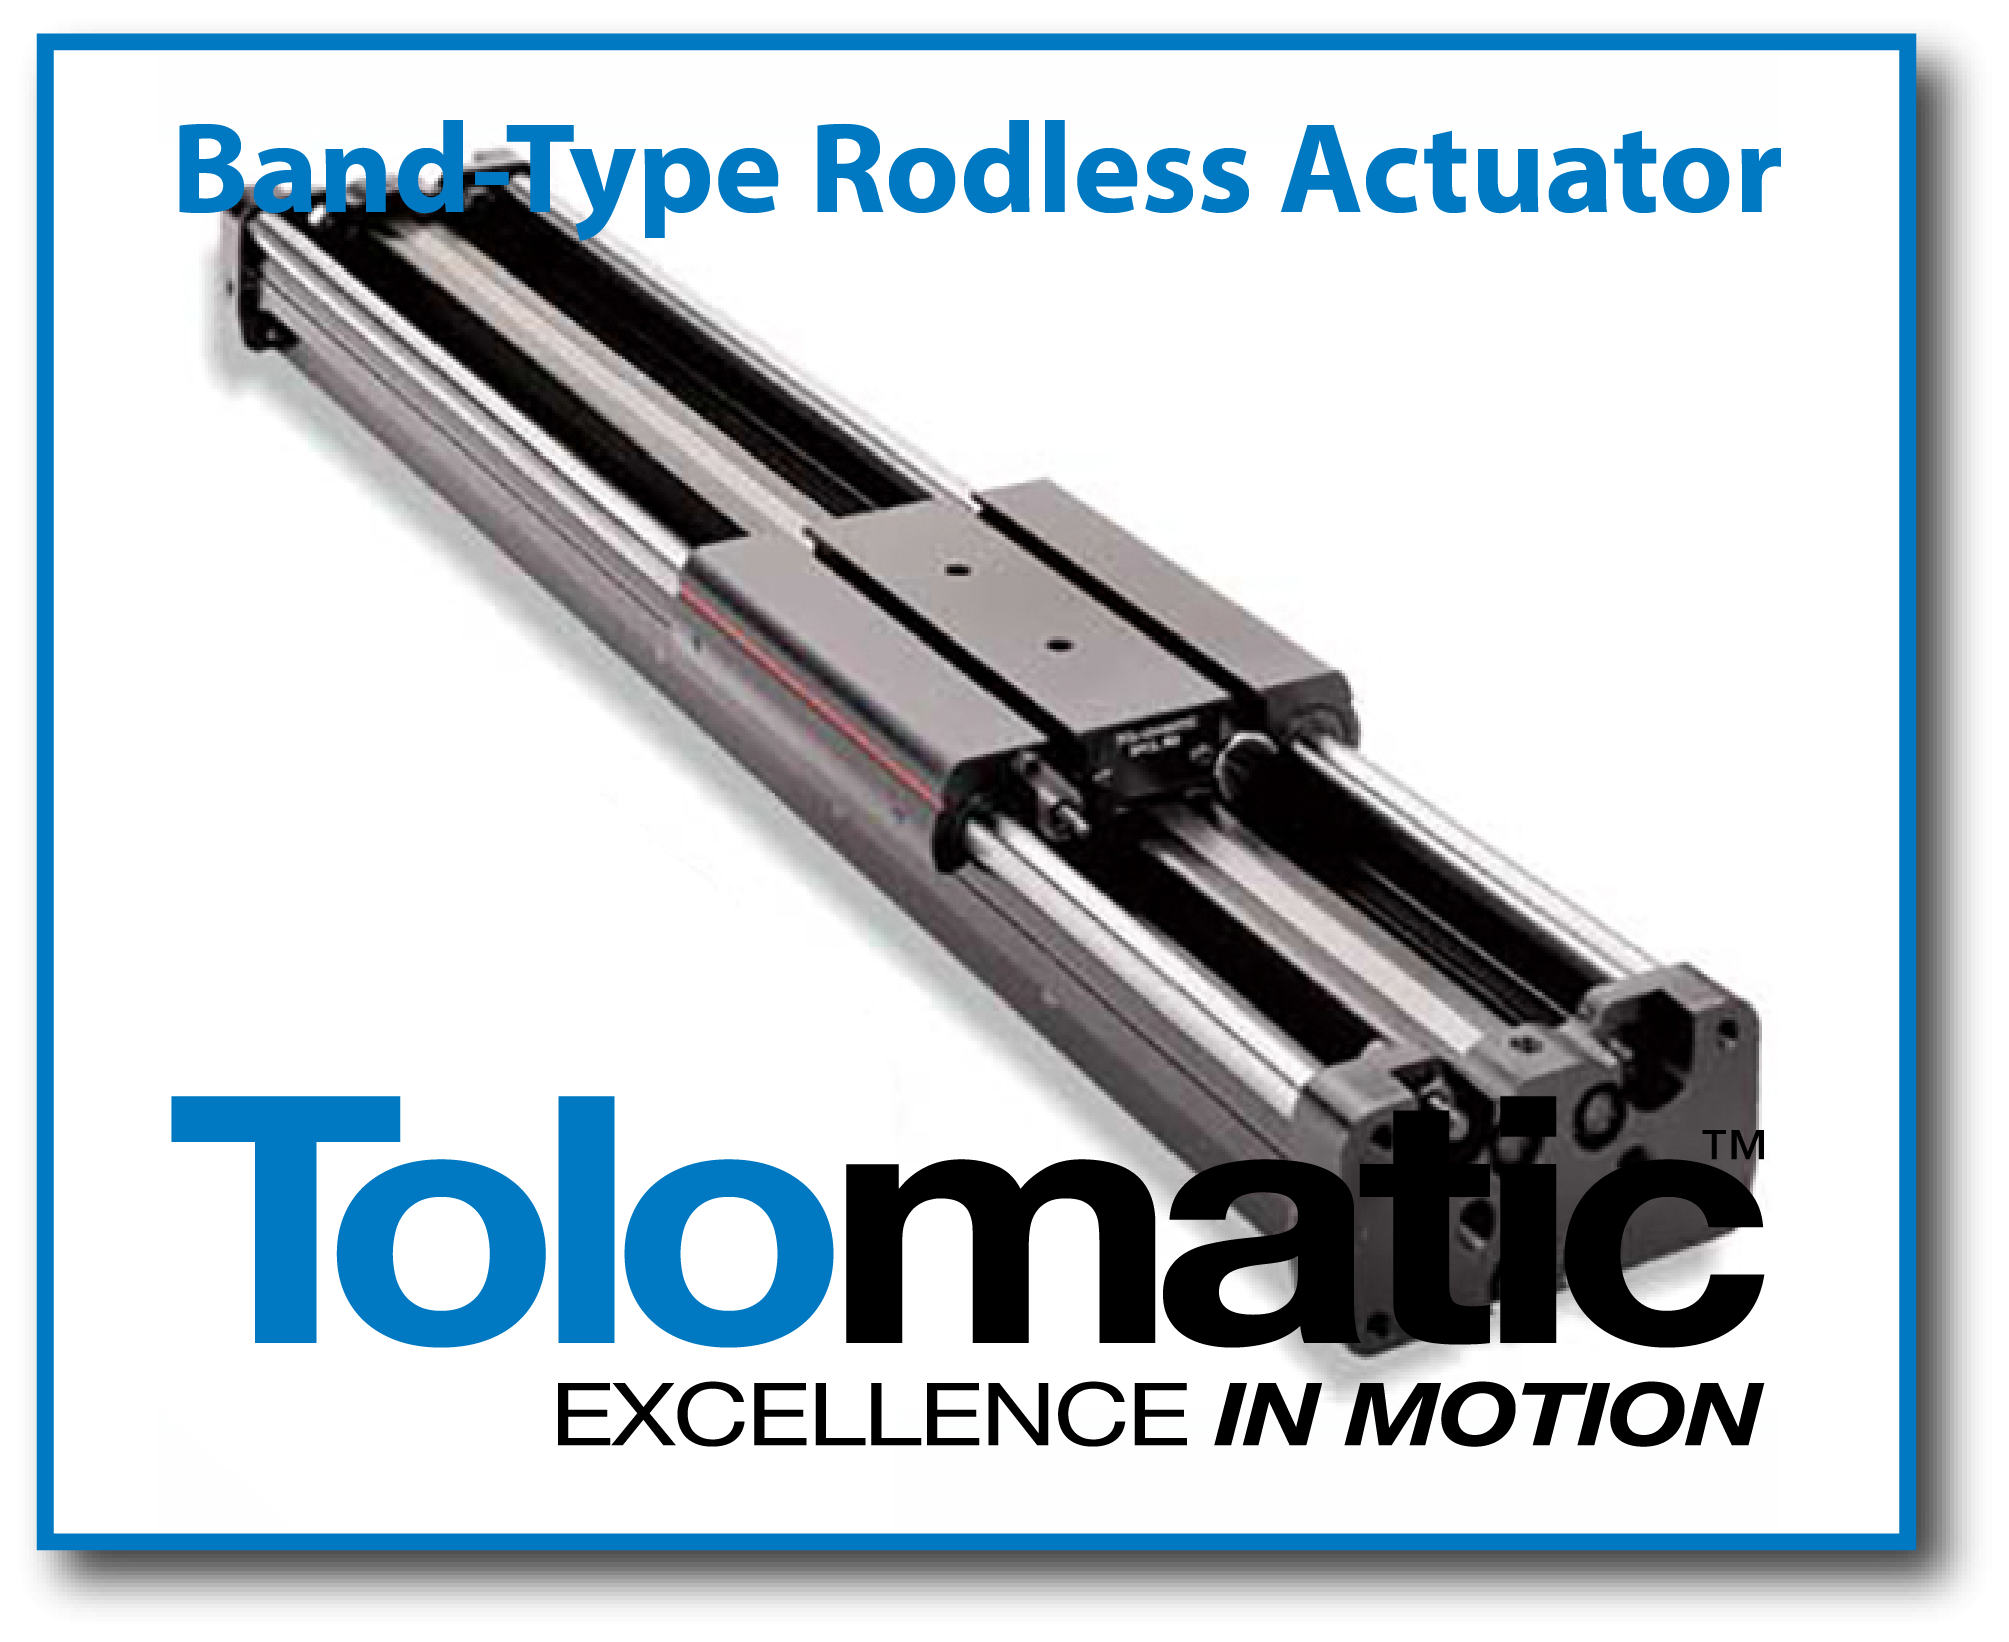 Tolomatic Actuator - Band-type Rodless